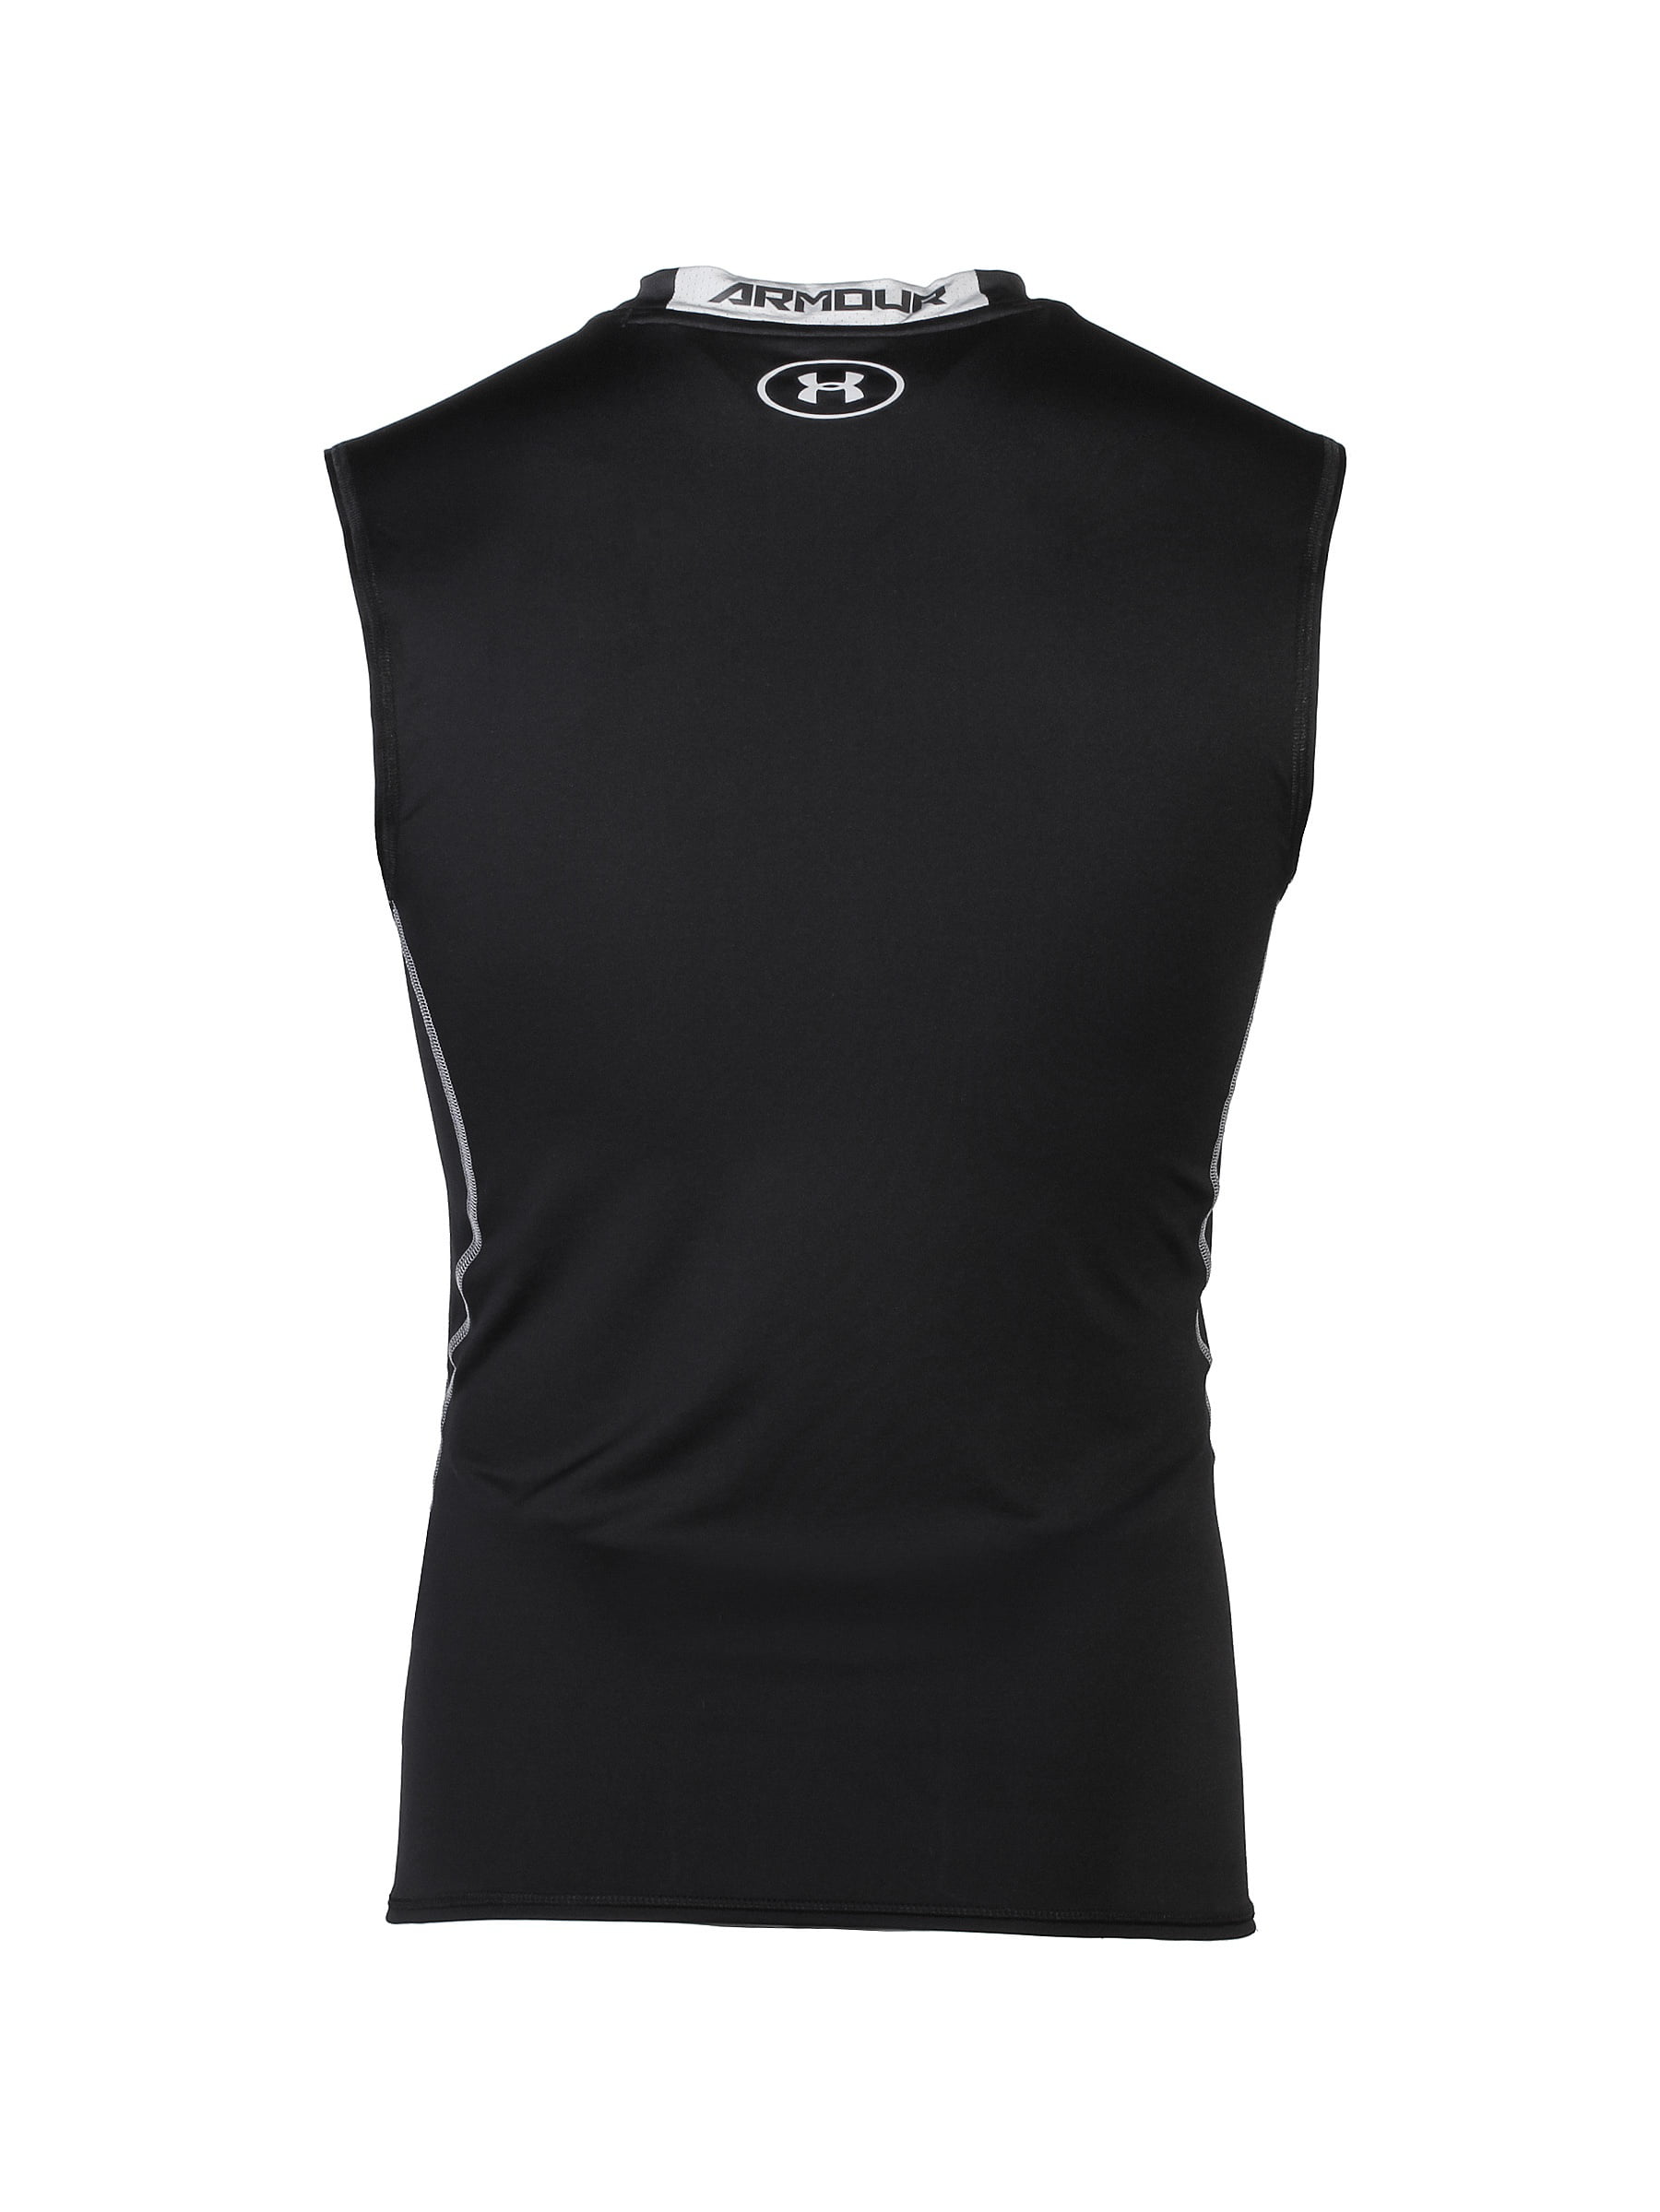 Men's UA CoolSwitch Armour Sleeveless Compression Shirt - Graphite